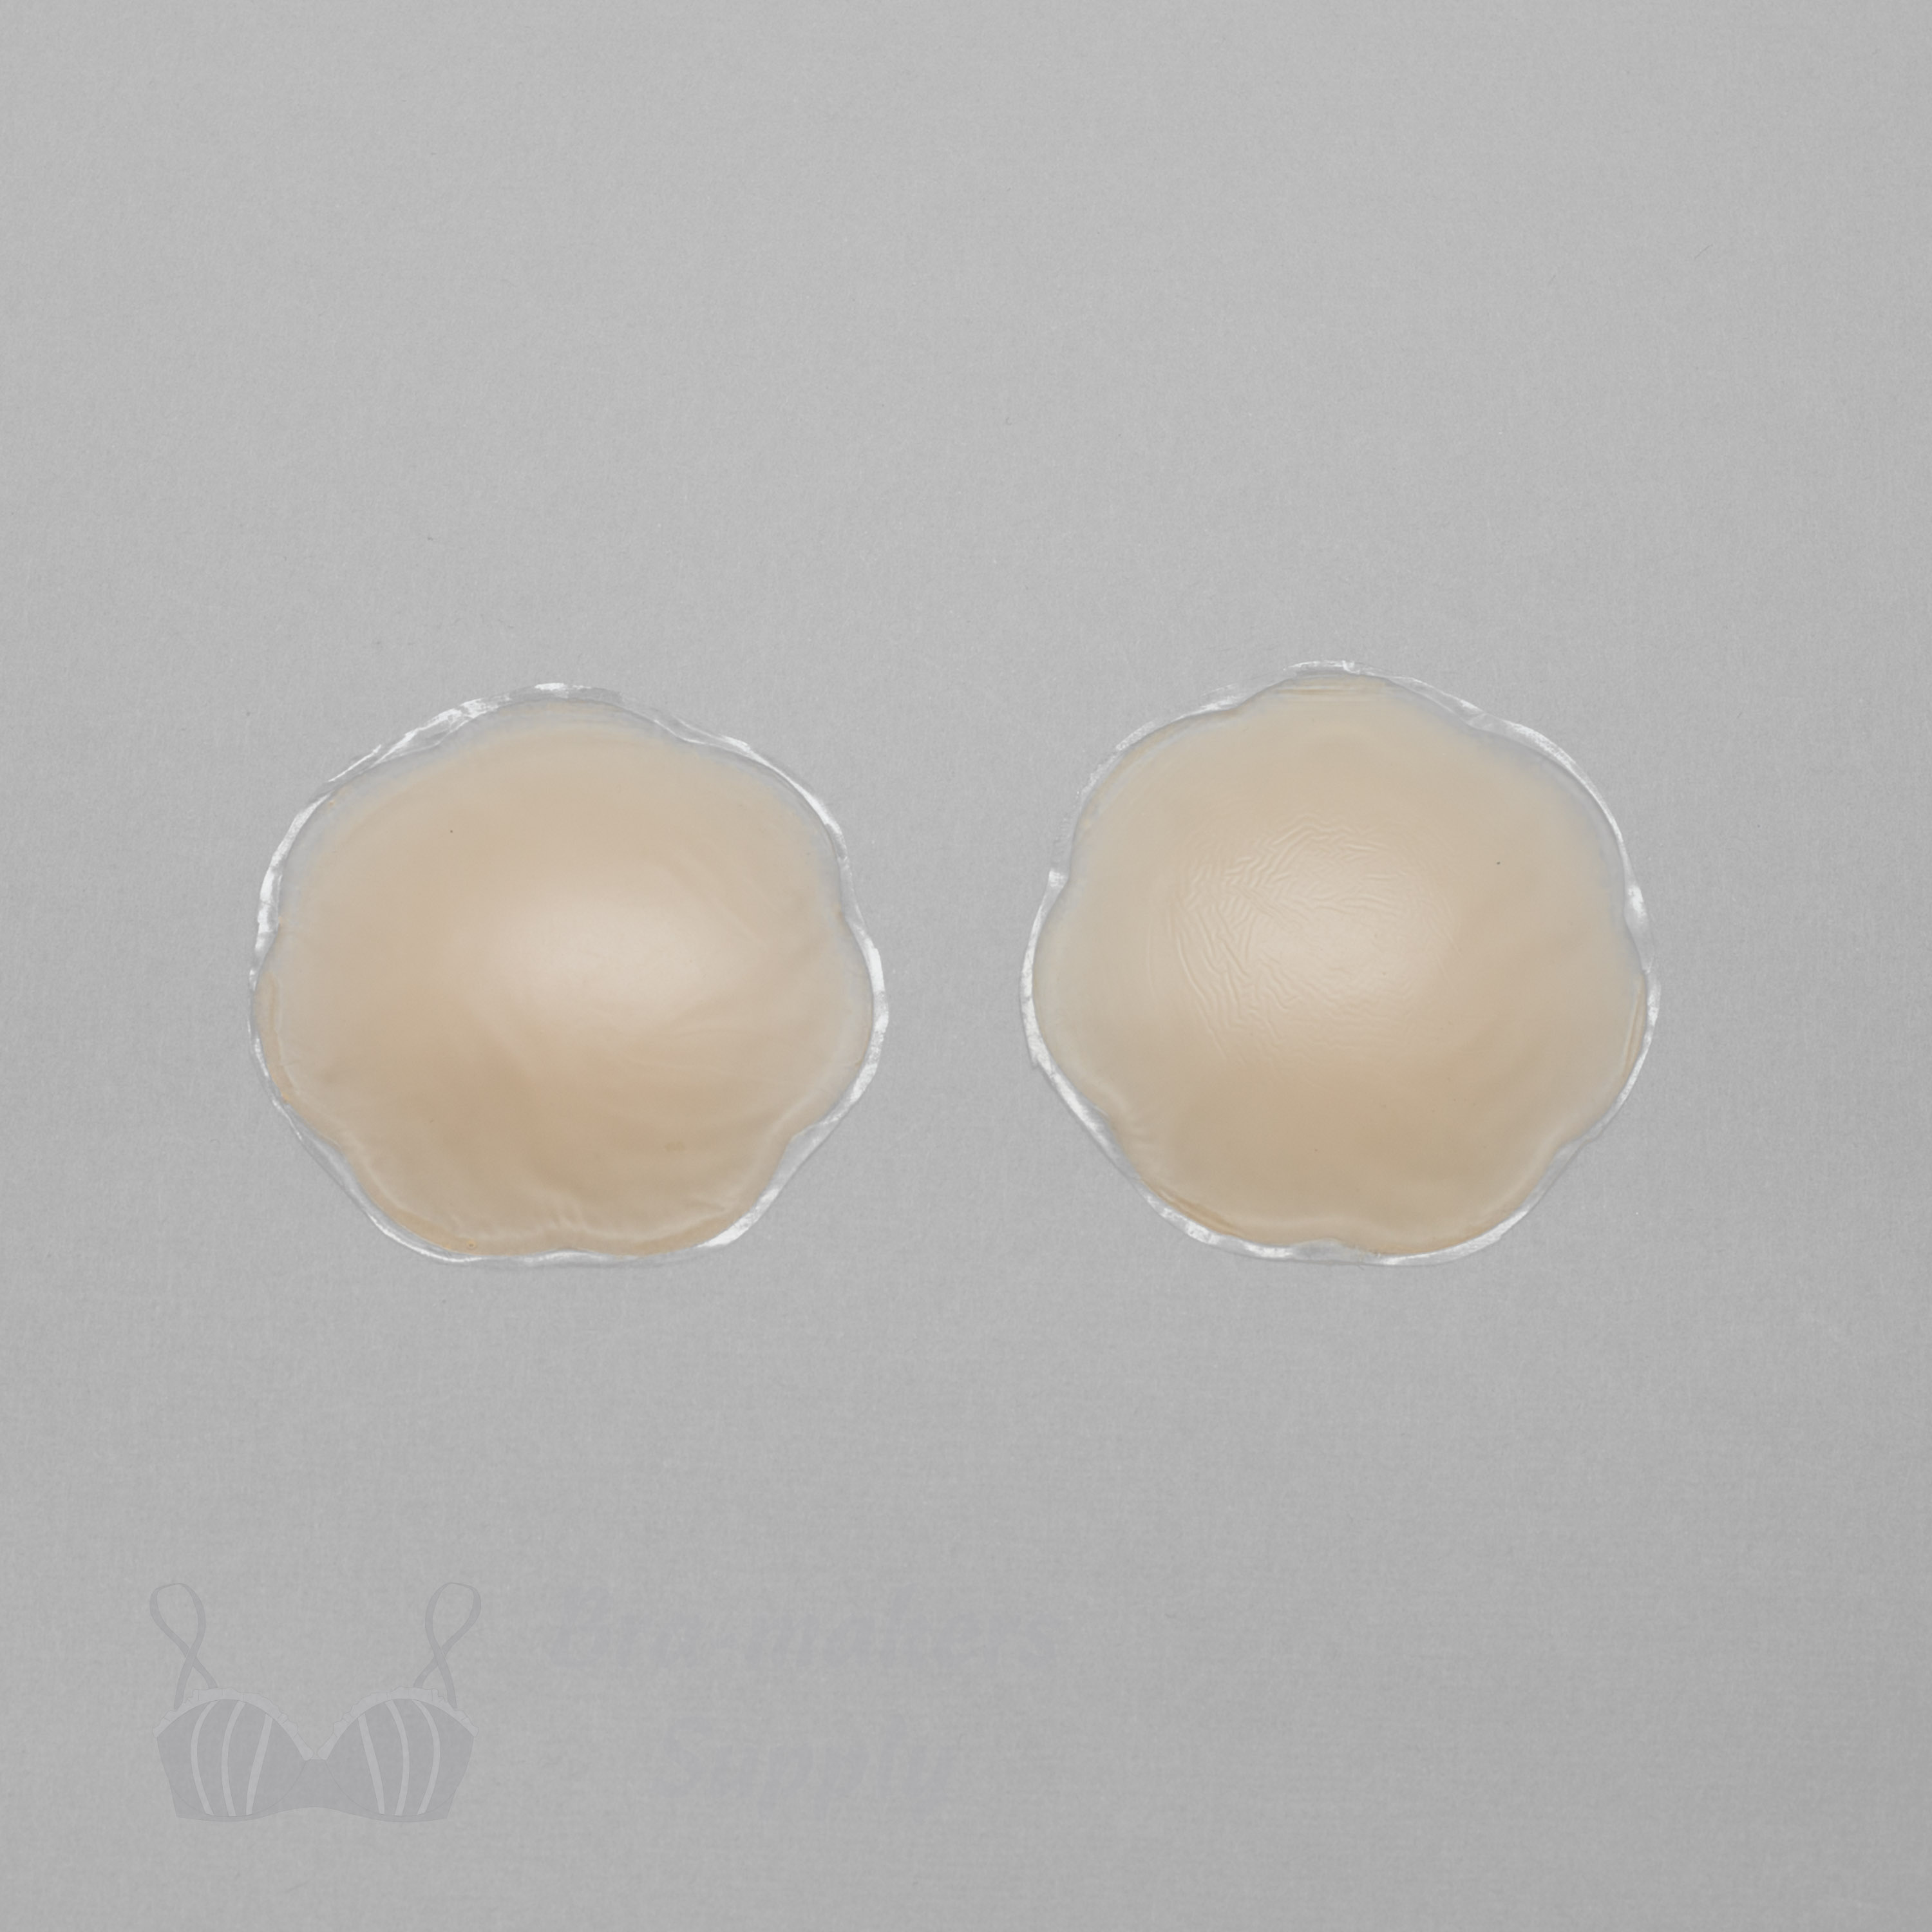 Silicone Nipple Covers - get them now at Bra-Makers Supply